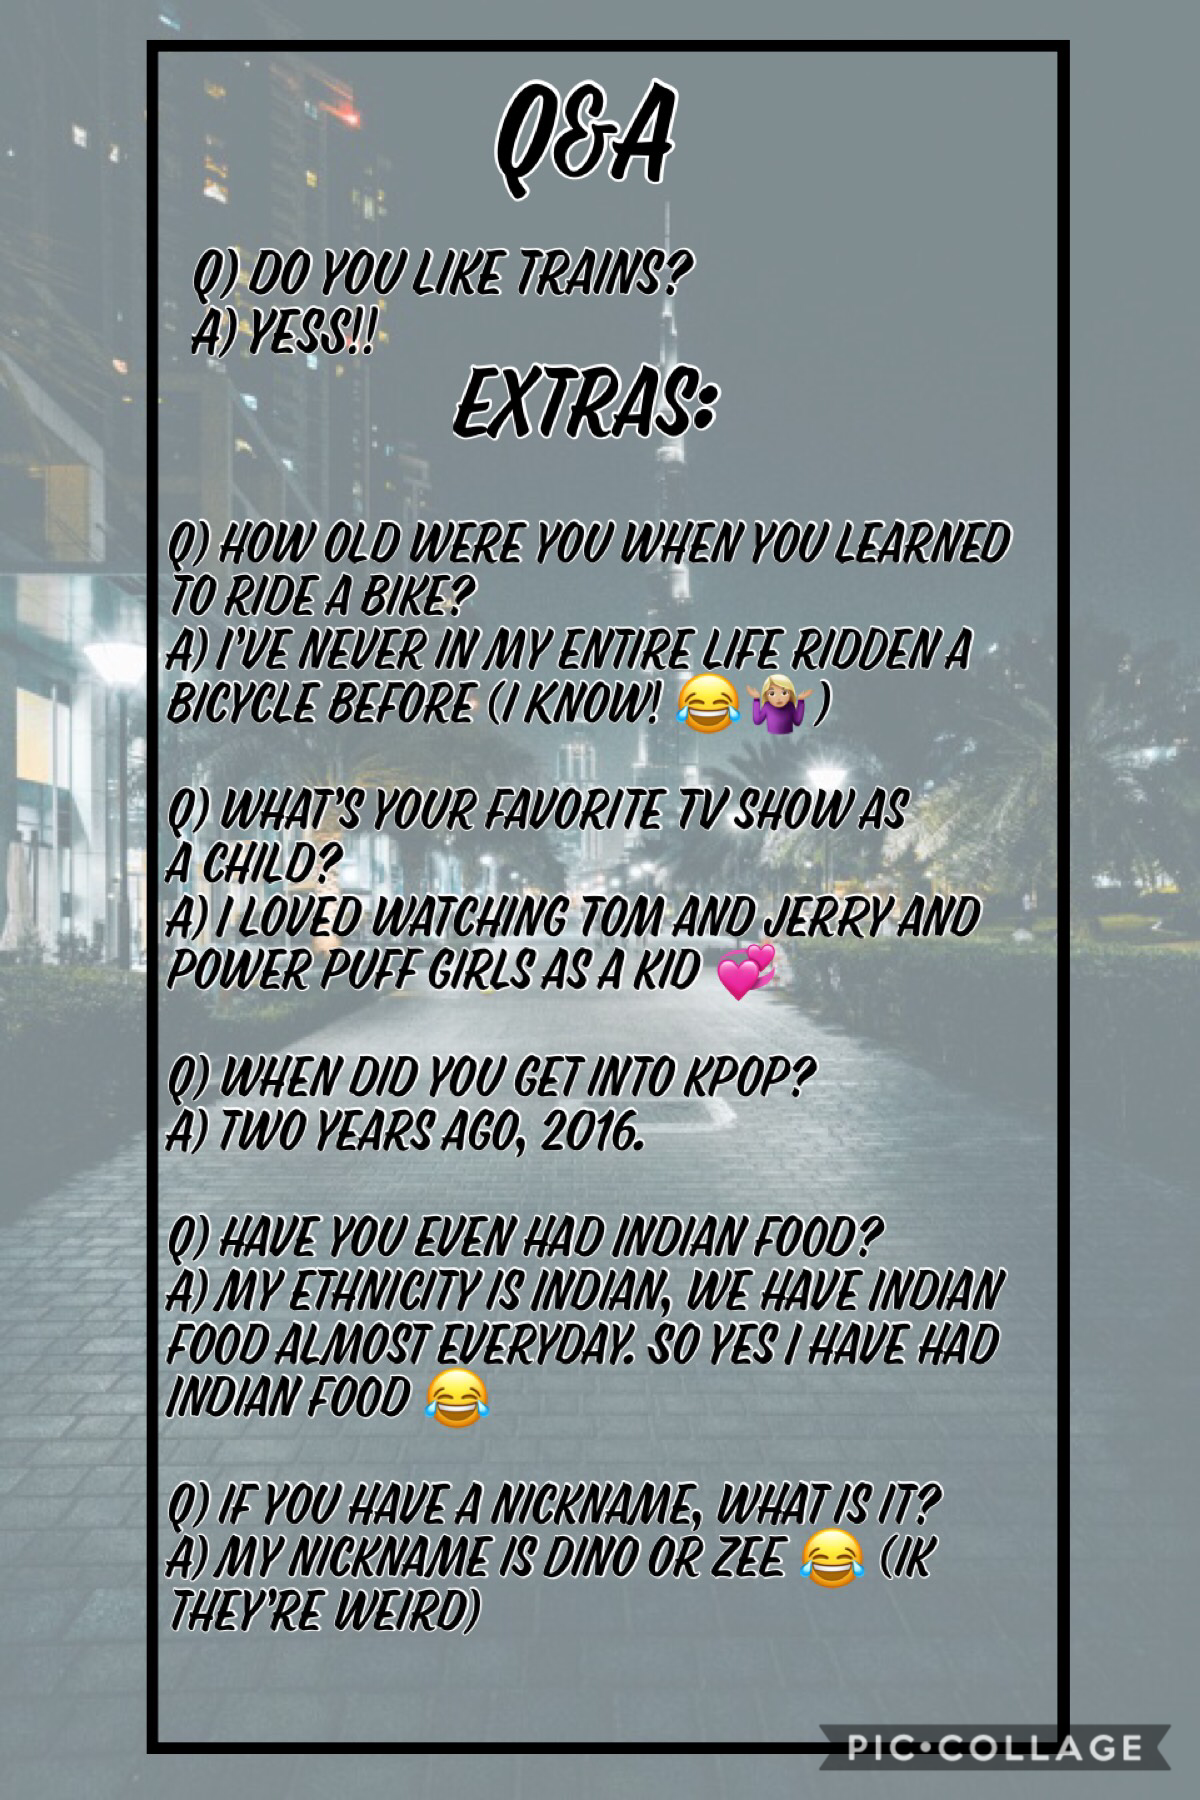 Any more questions? Feel free to ask 💖 